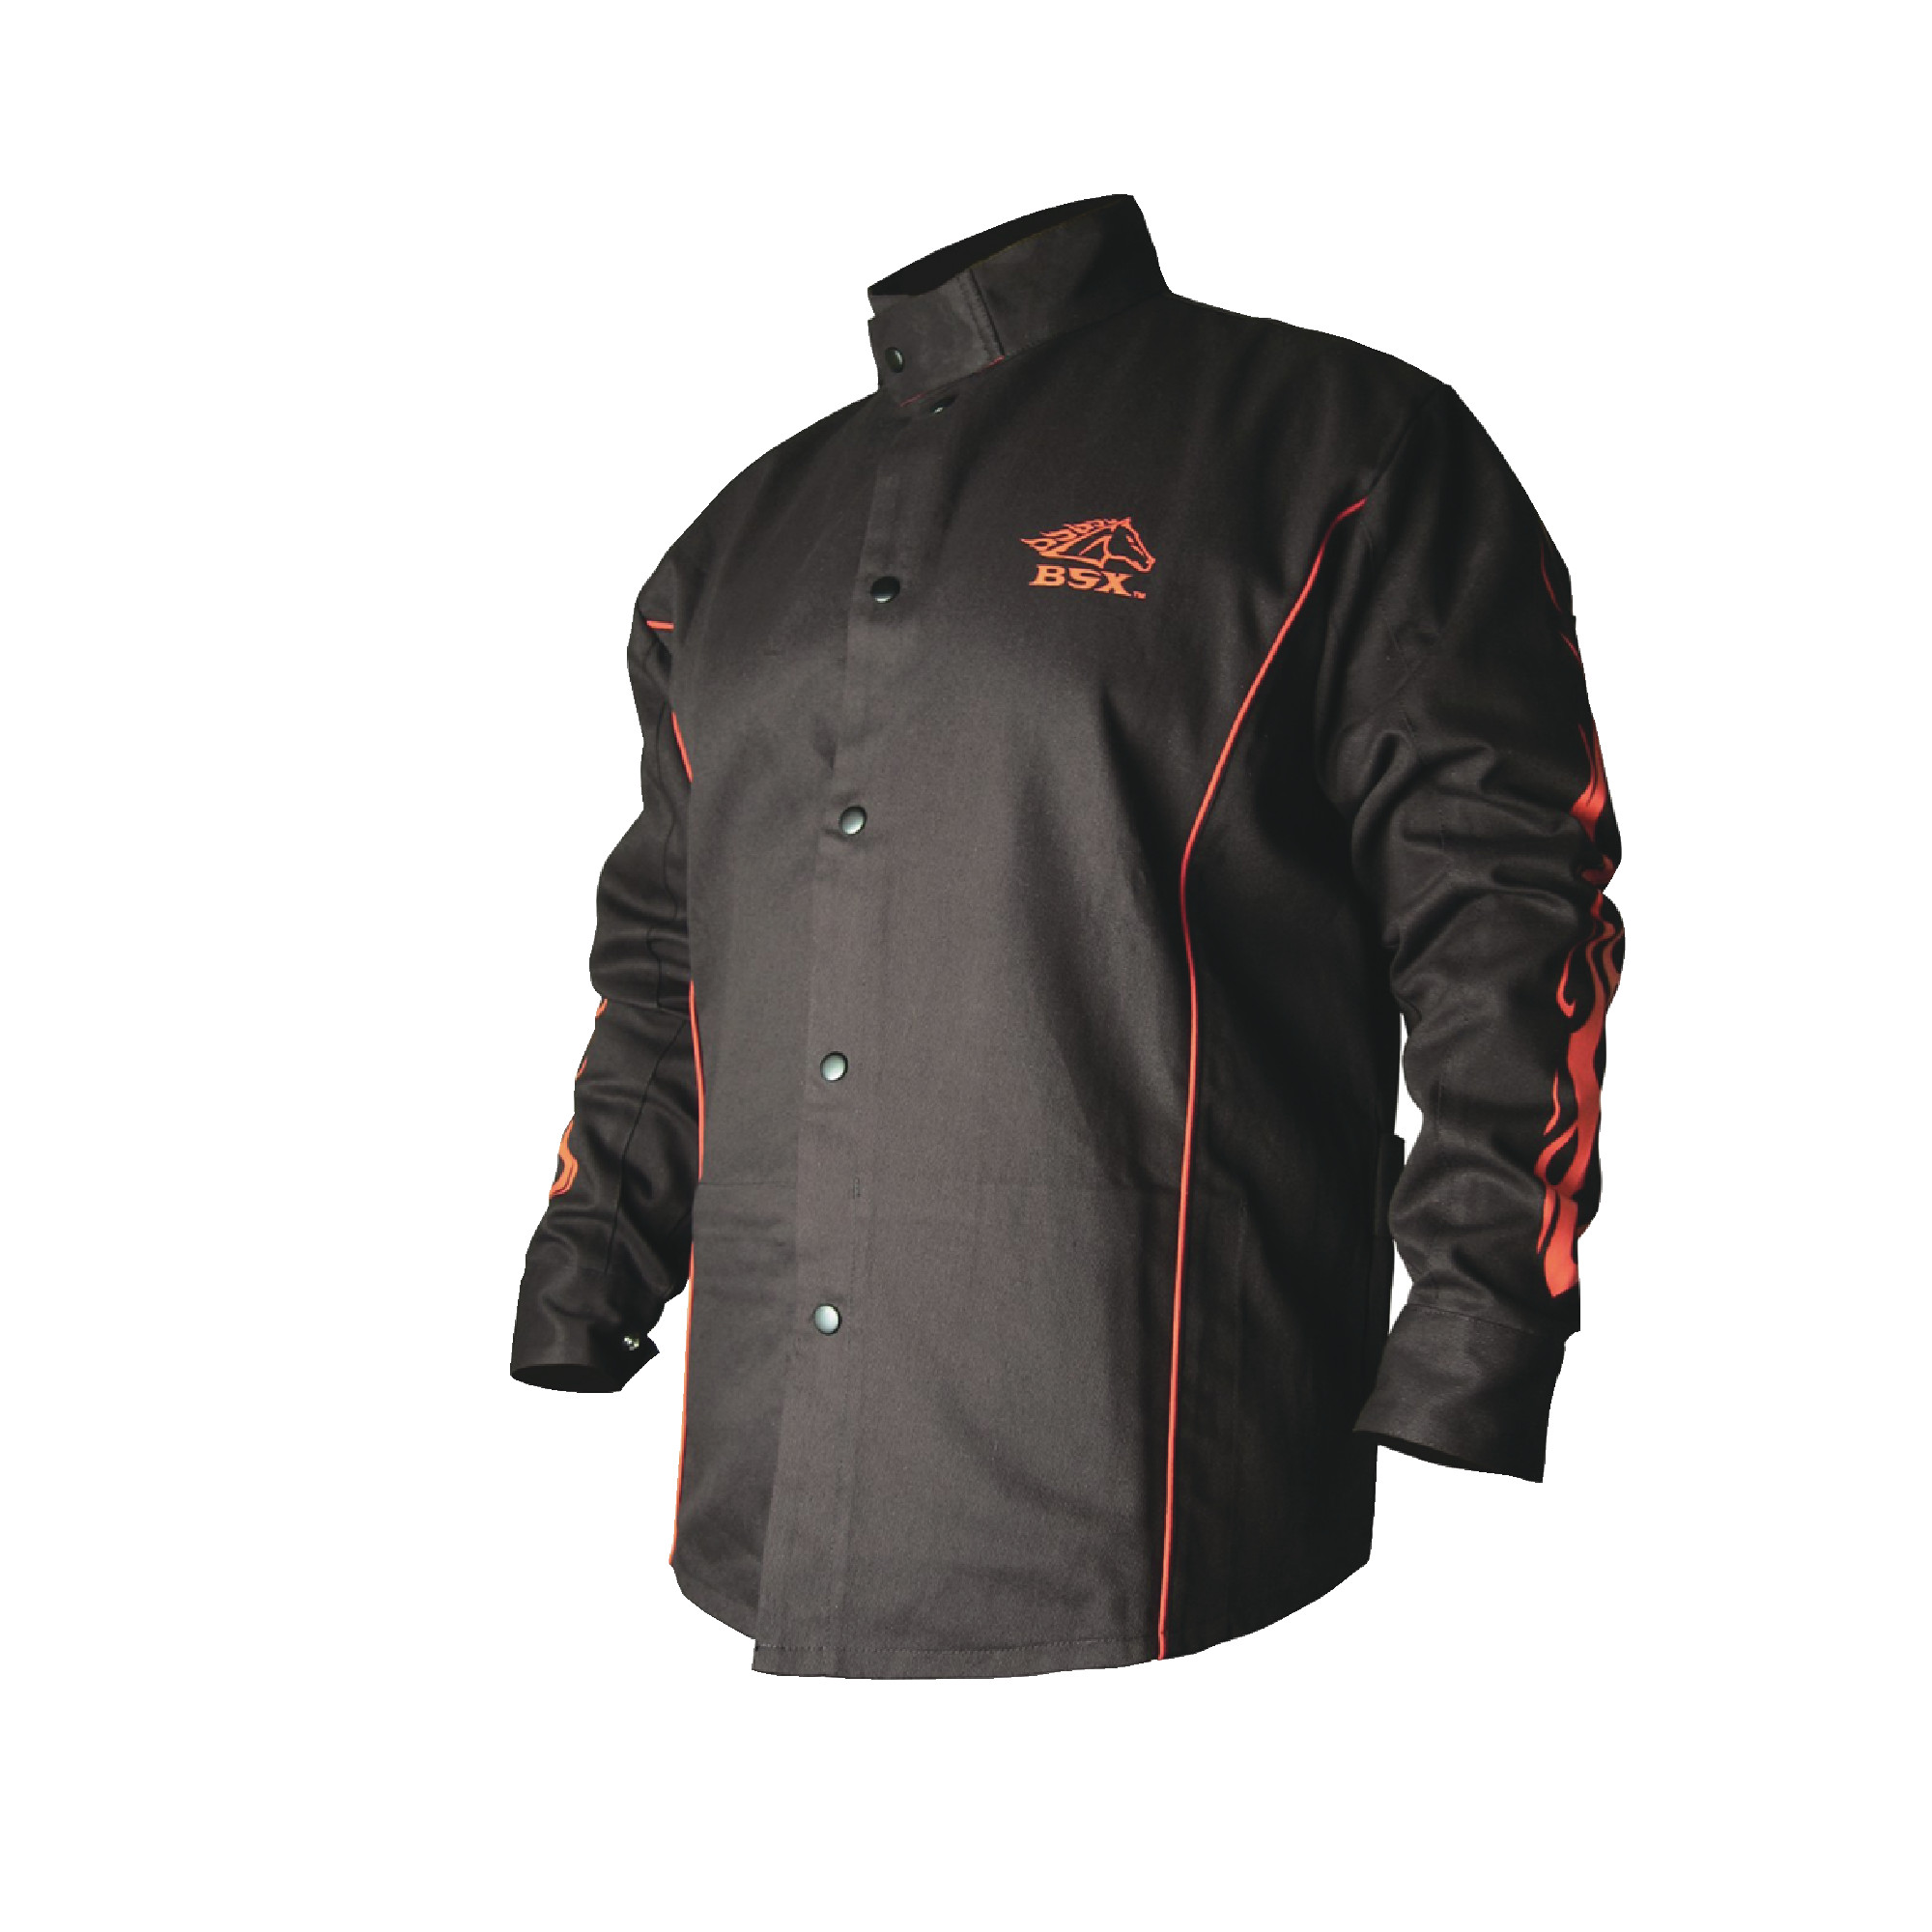 BSX Stryker Black With Red Flames Fire Resistant Welding Jacket - Size L